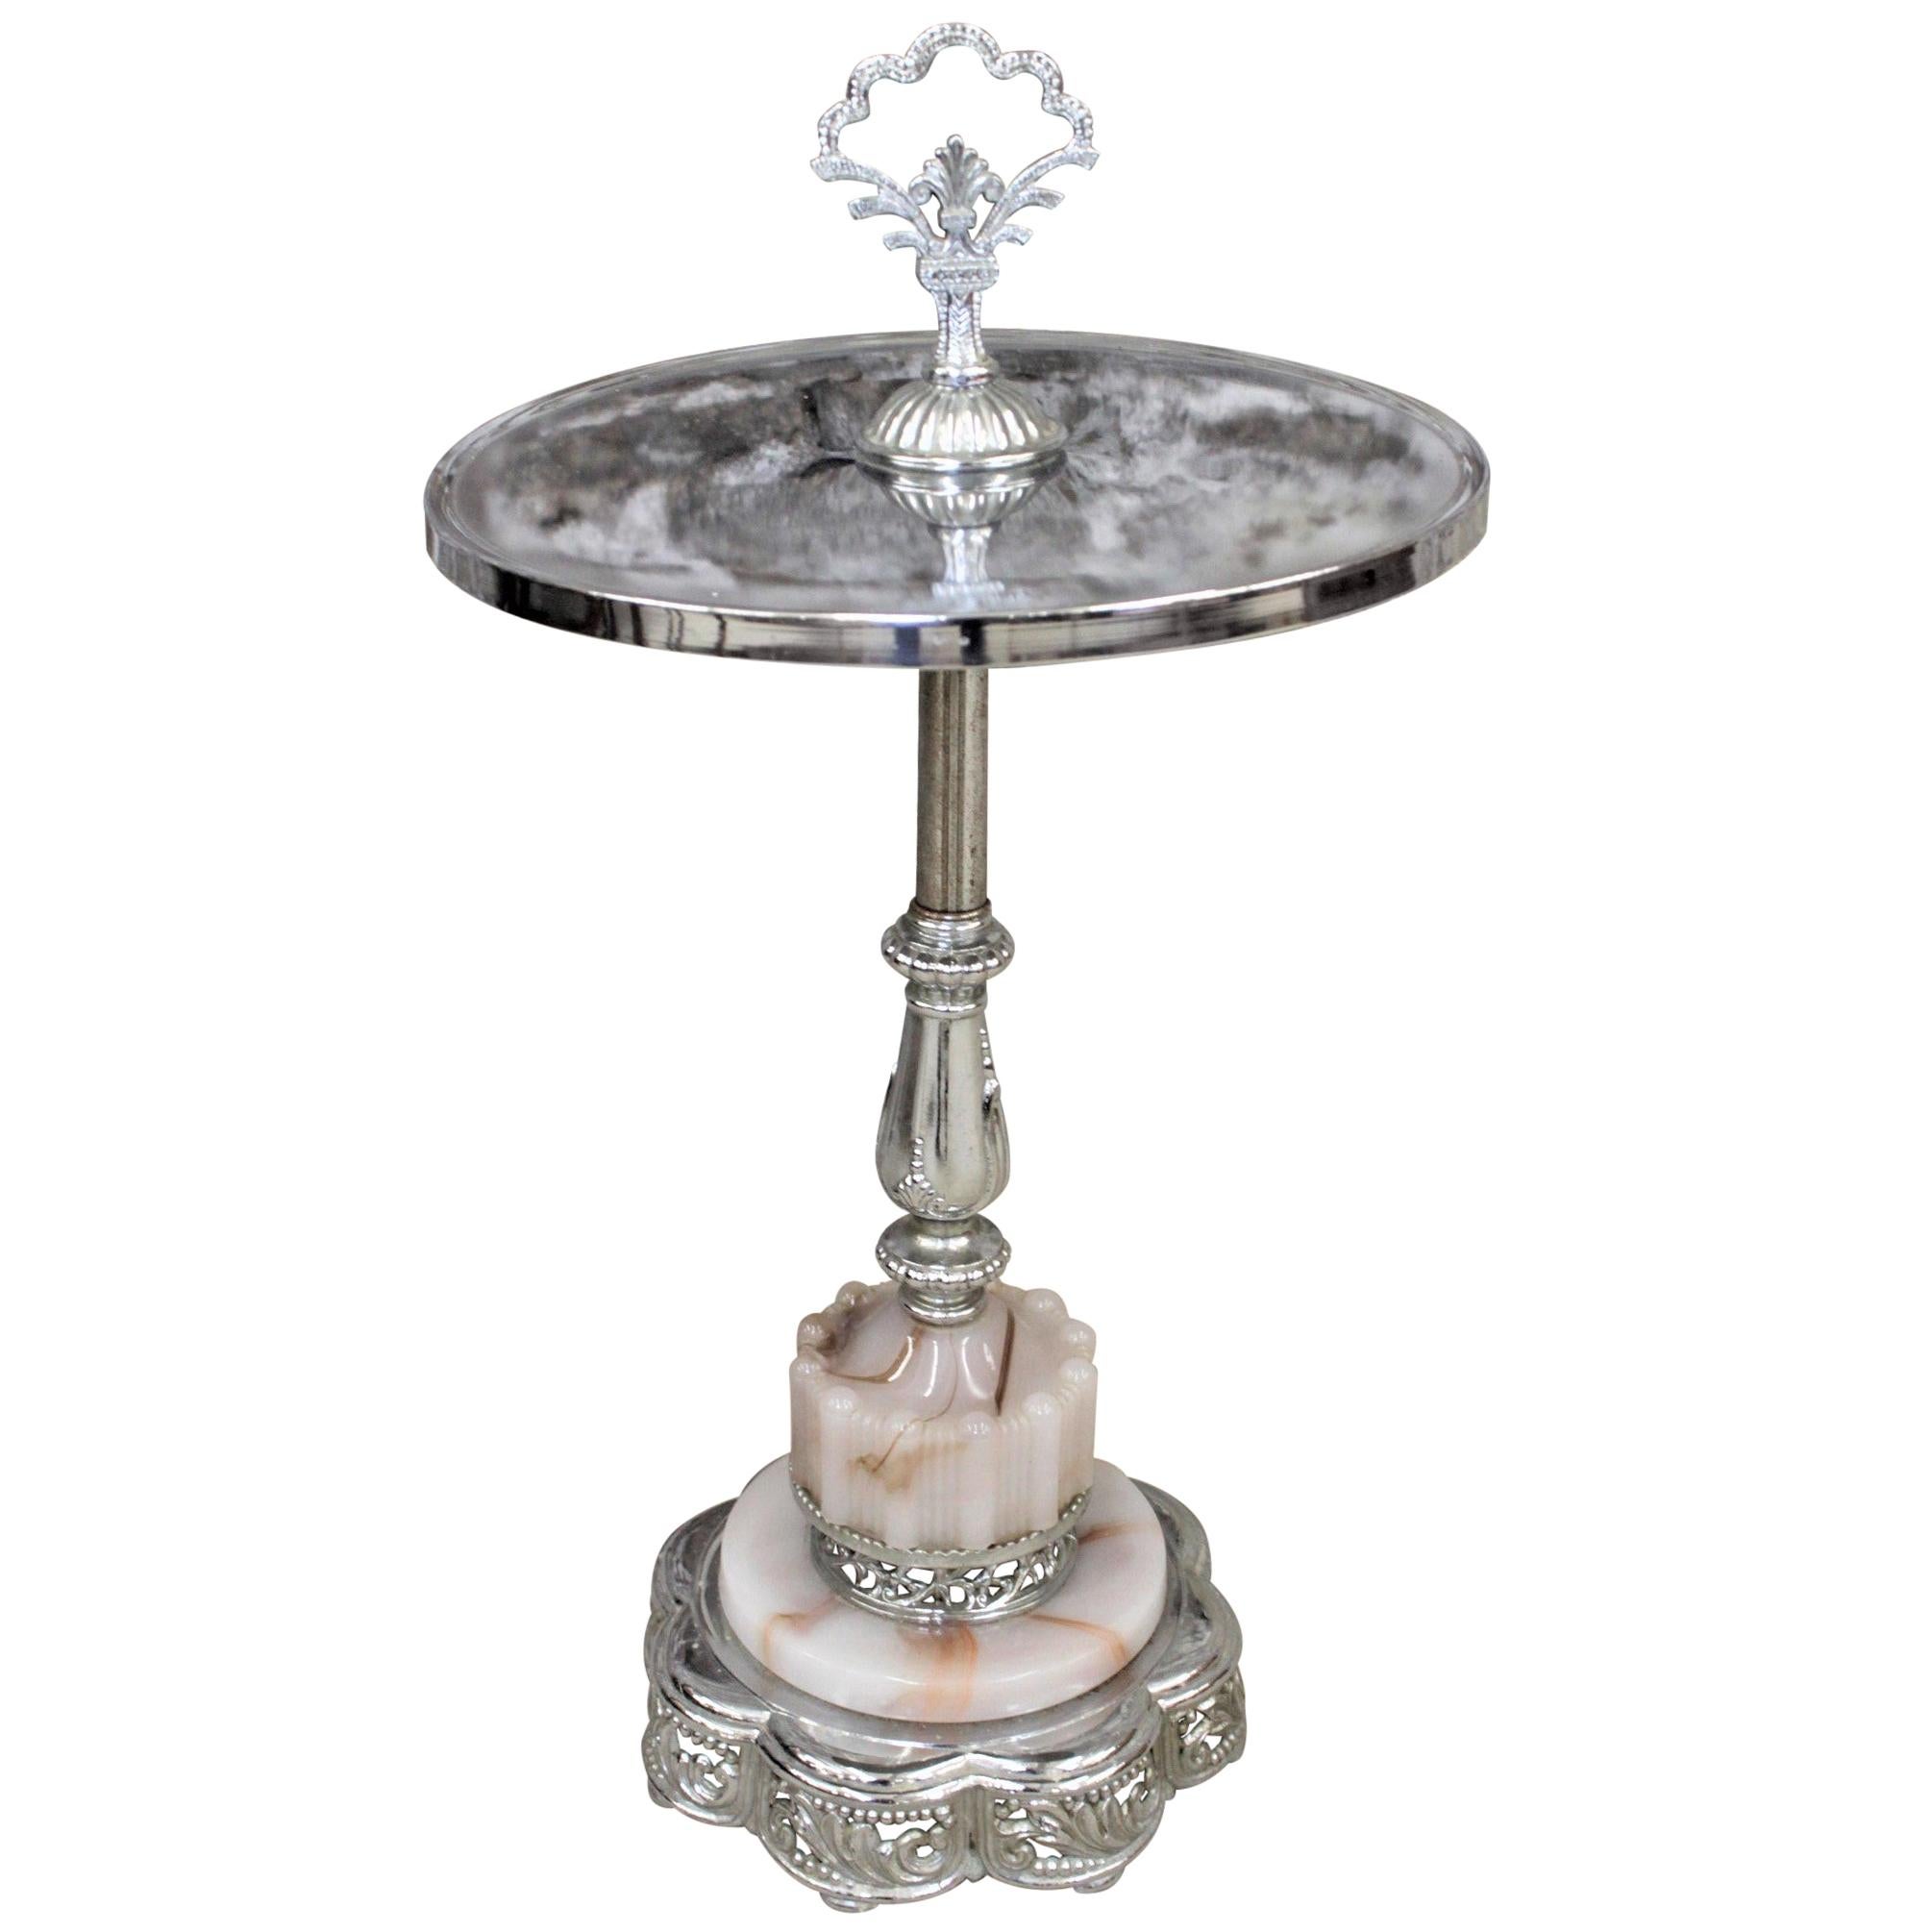 Art Deco Styled Chrome and Swirled Glass Smoker's Stand or Accent Table